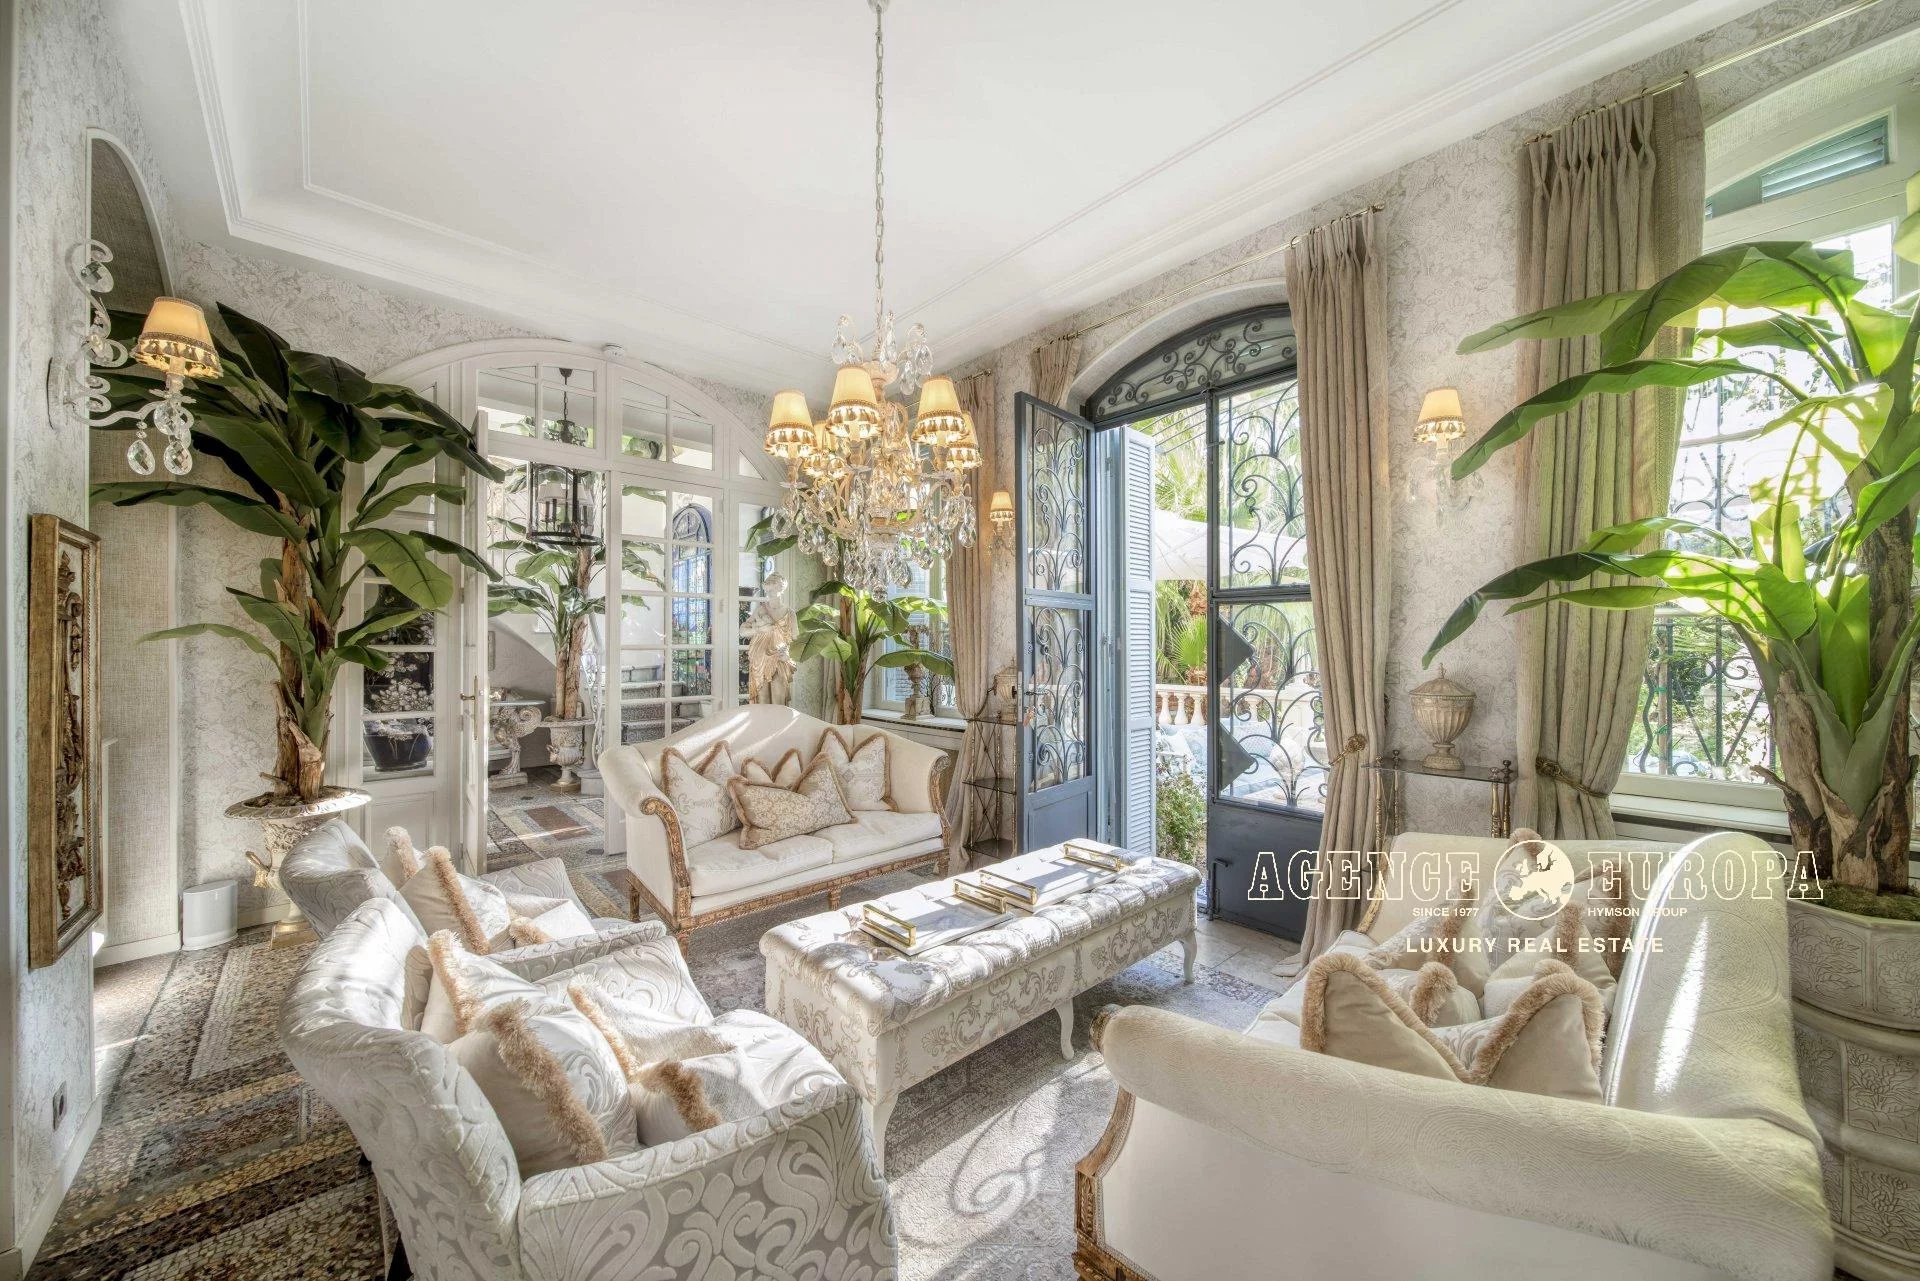 CANNES CITY CENTER - HISTORICAL PROPERTY